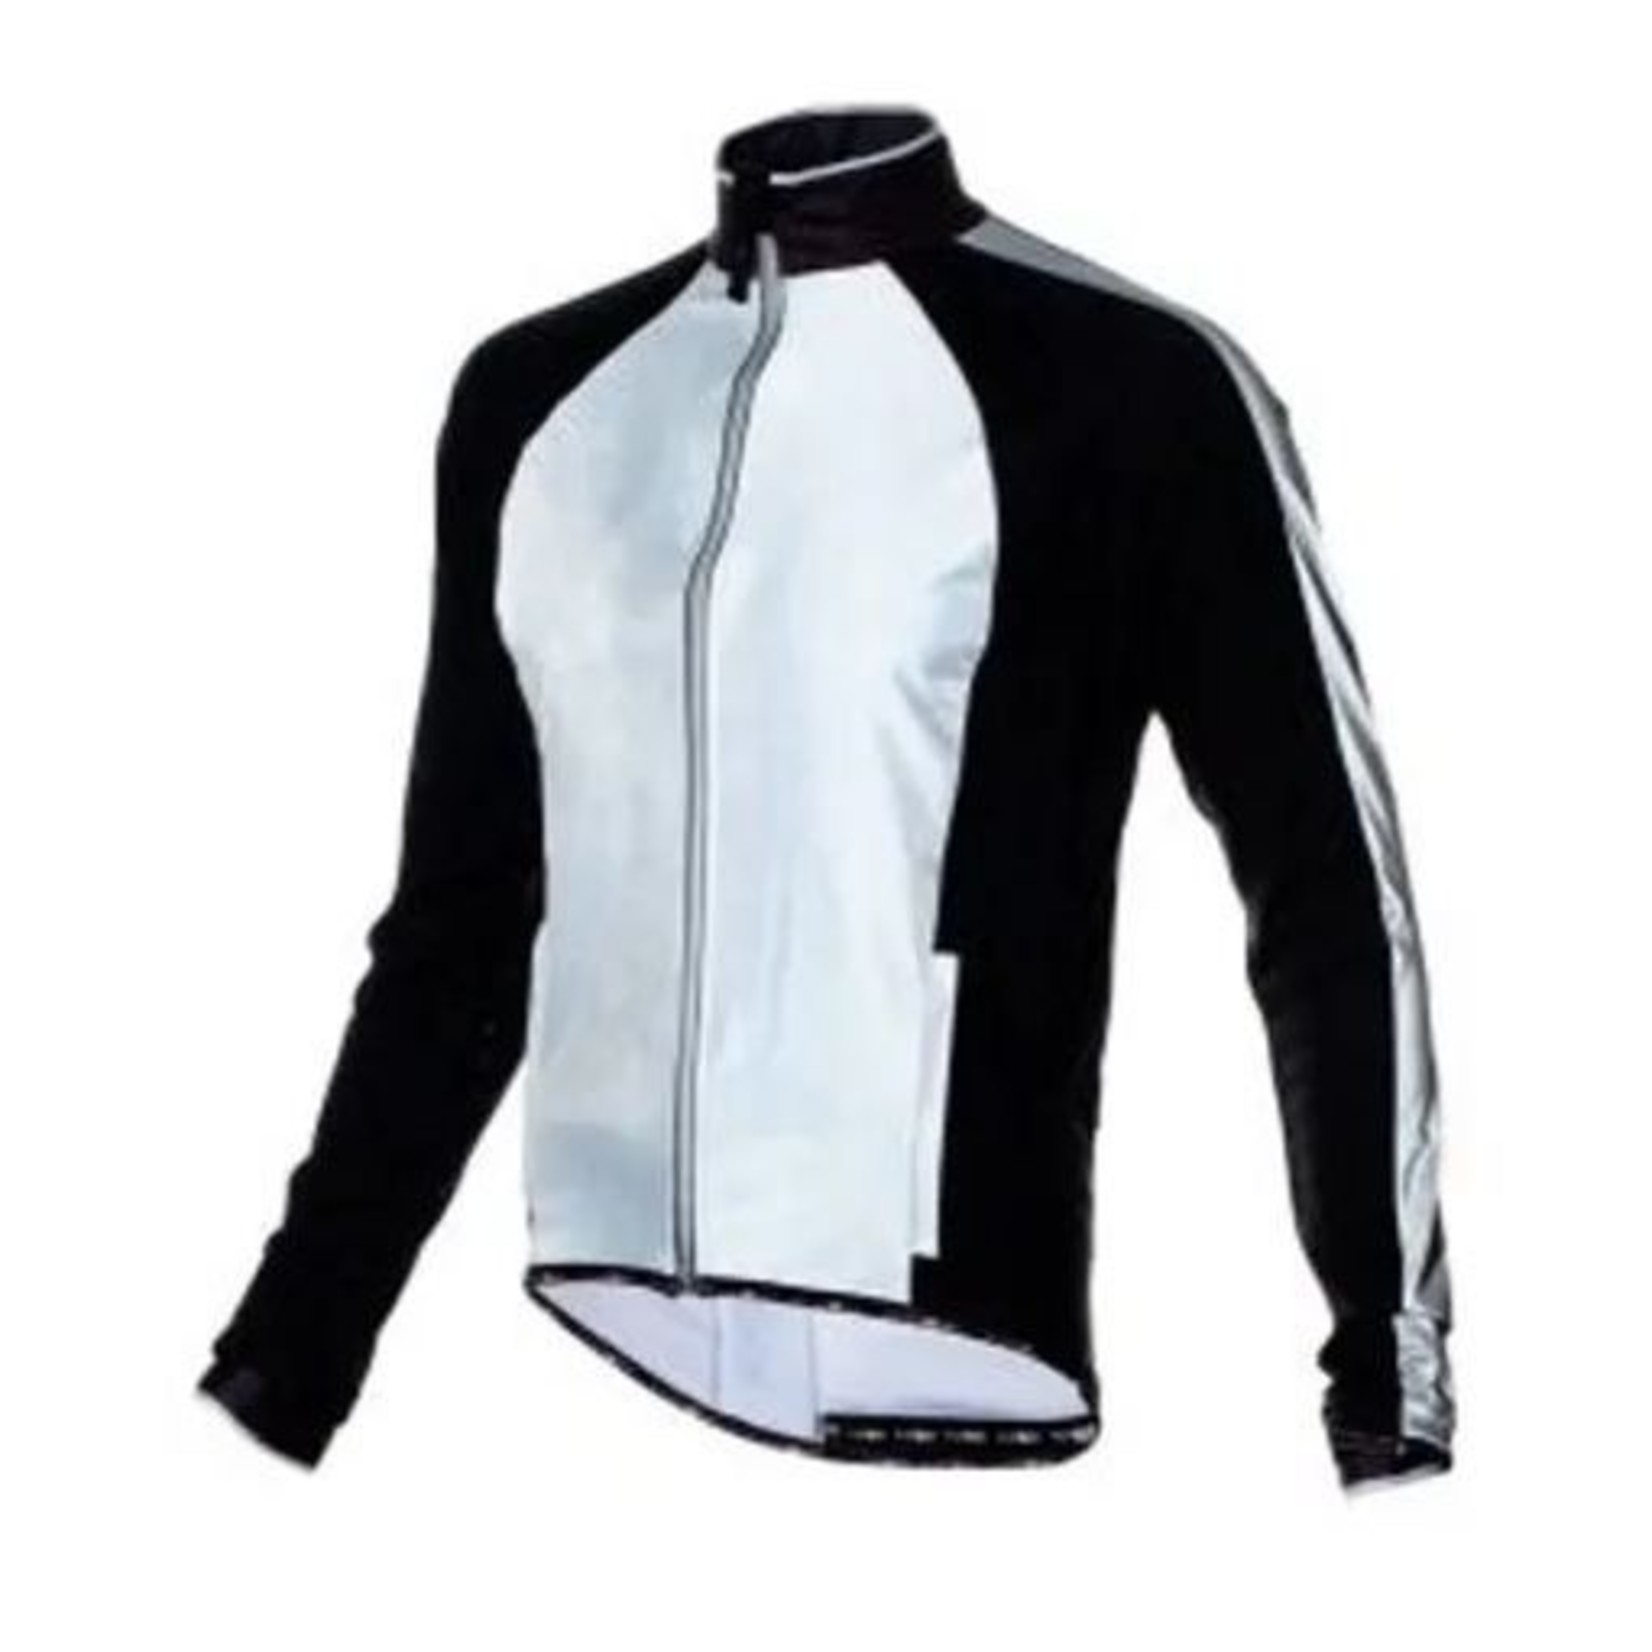 Funkier Funkier Men Jacket - Soft Shell Reflective - Thermal - Water Resistant - X-Large